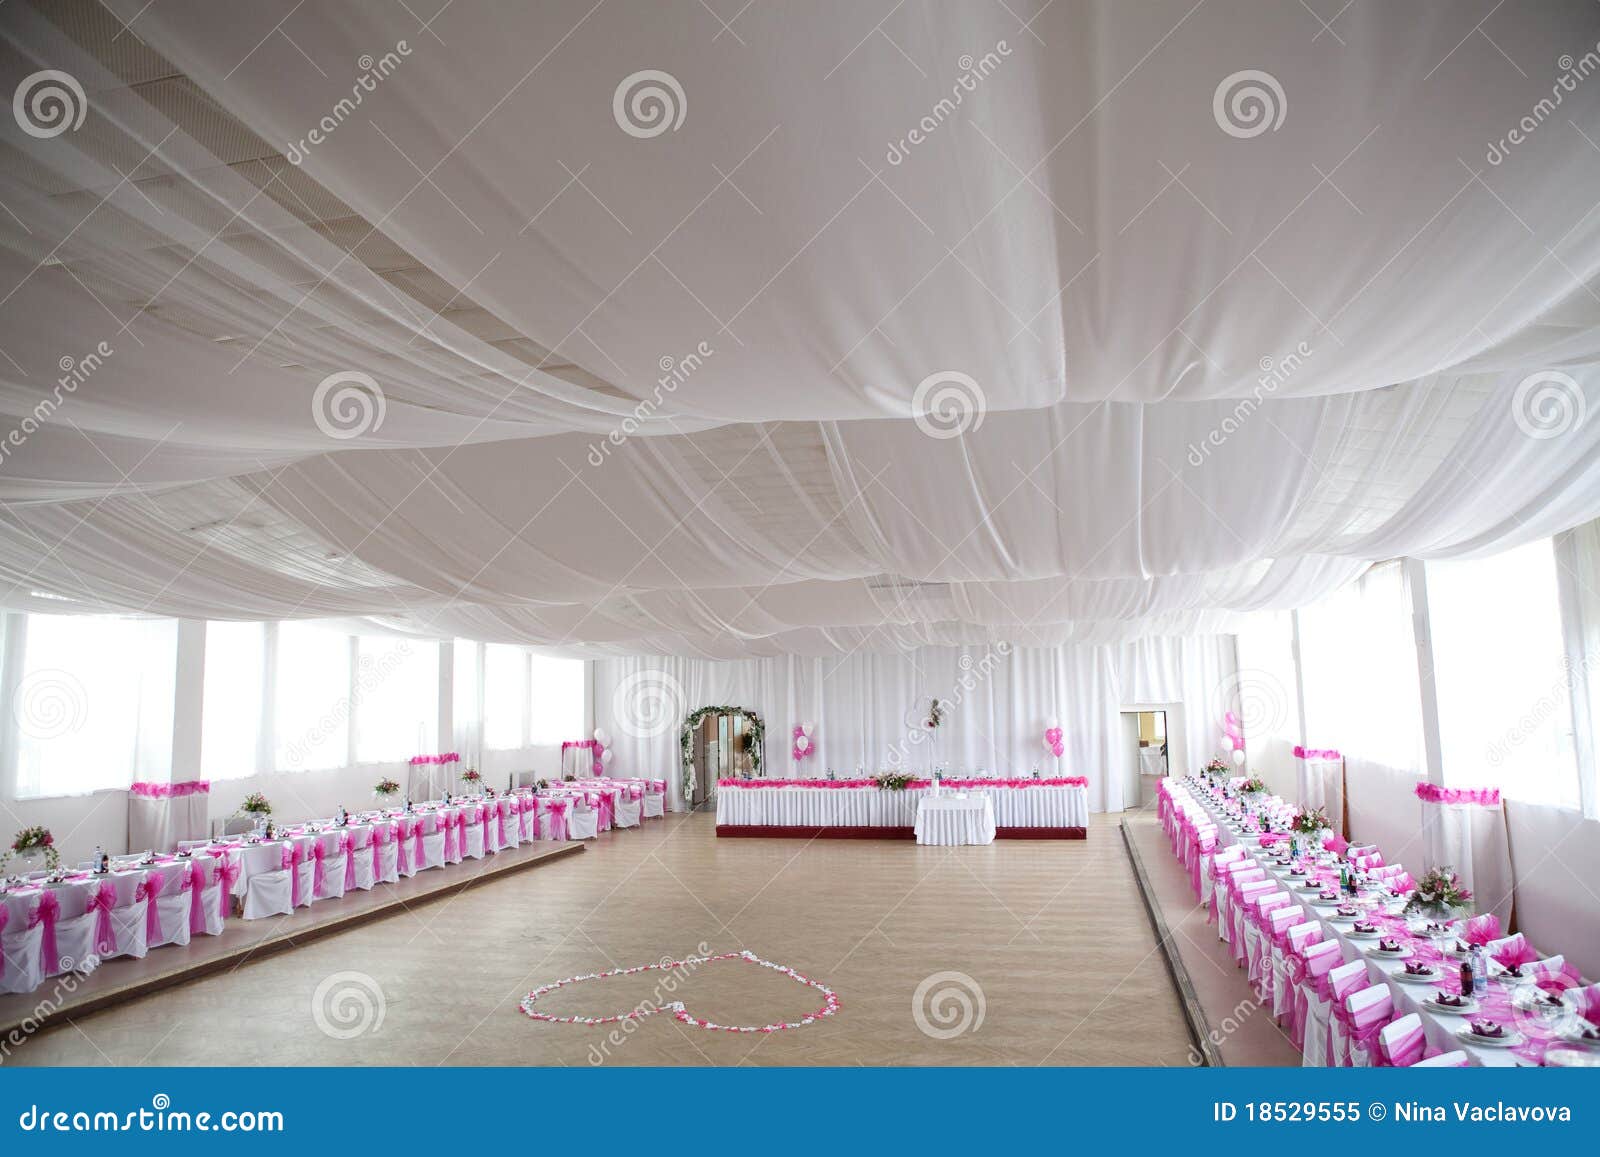 the inside of a massive white wedding tent with ta